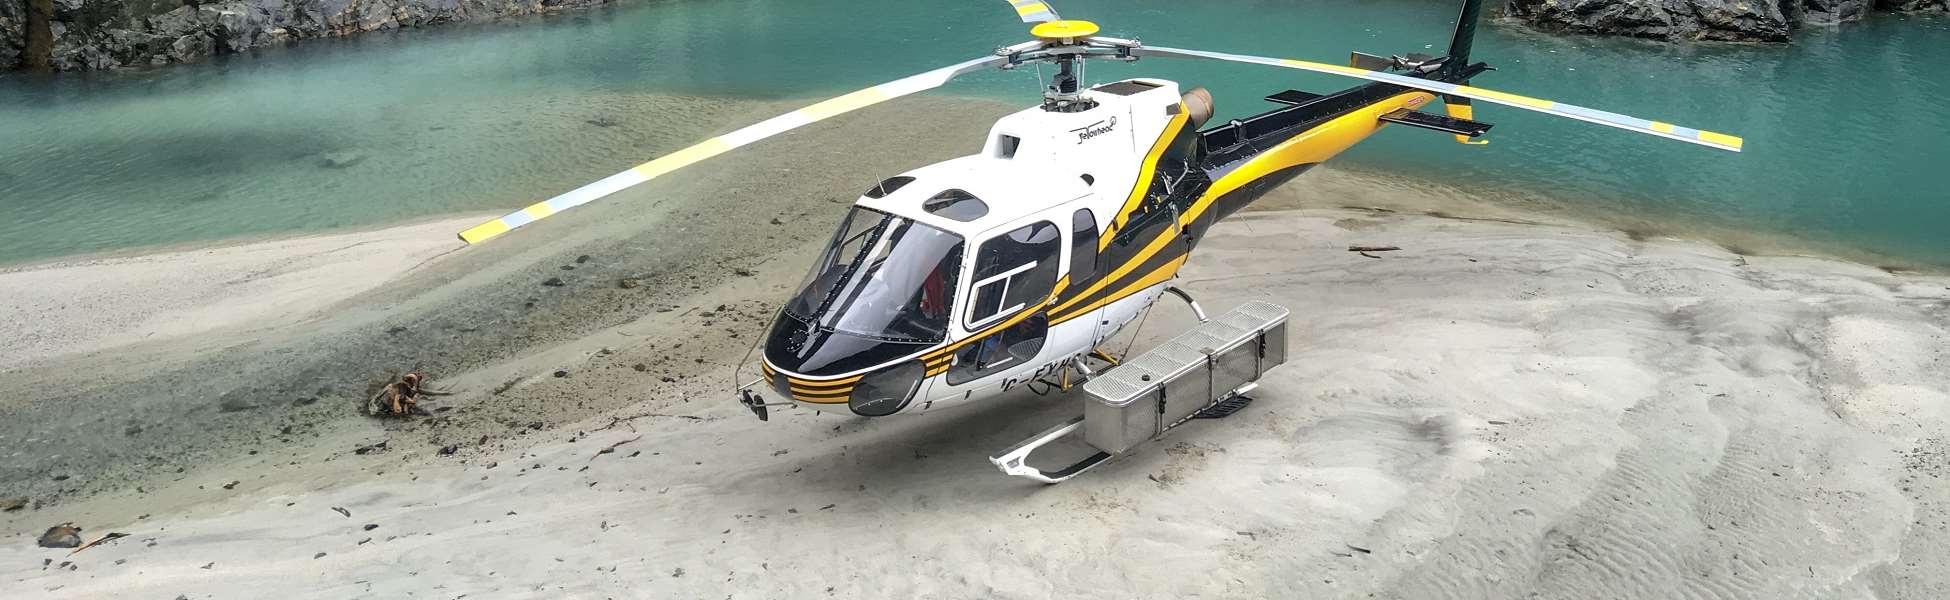 helicopter services aerial surveying